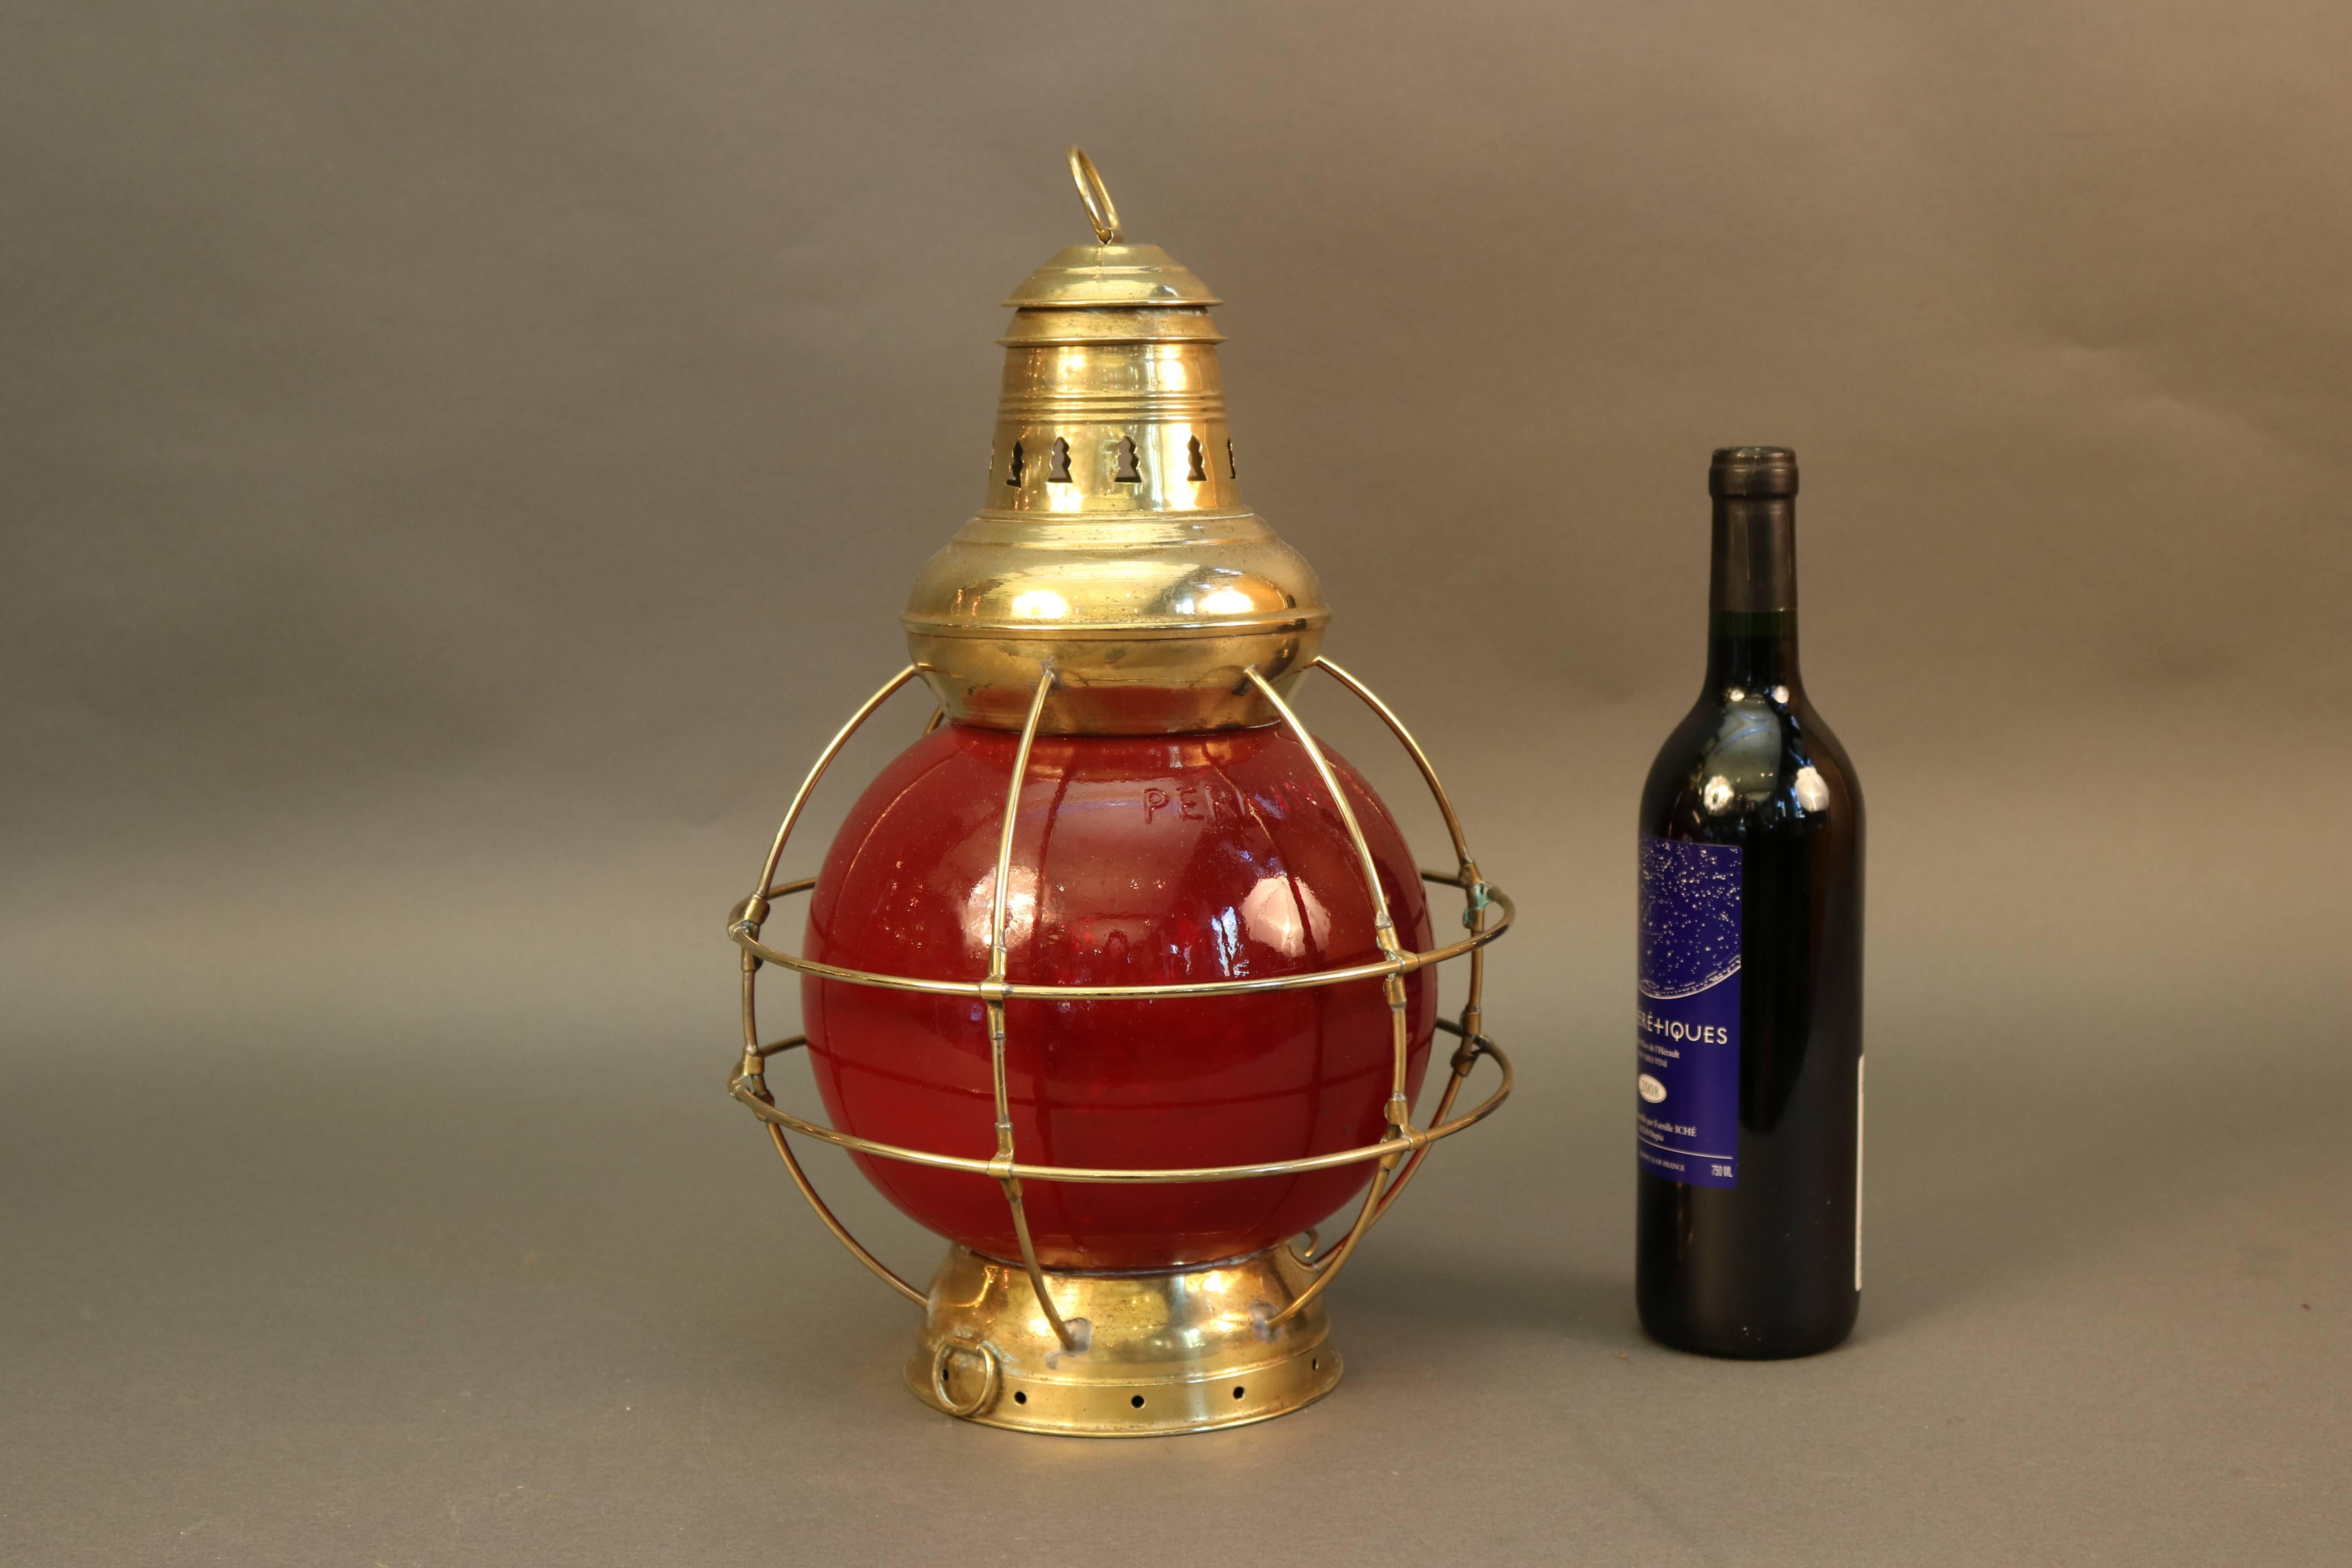 Solid brass Perkins Marine ship's lantern with rich red lens and protective brass bars, vented top with hoisting ring. Dimensions: 10" L x 10" W x 14" H.